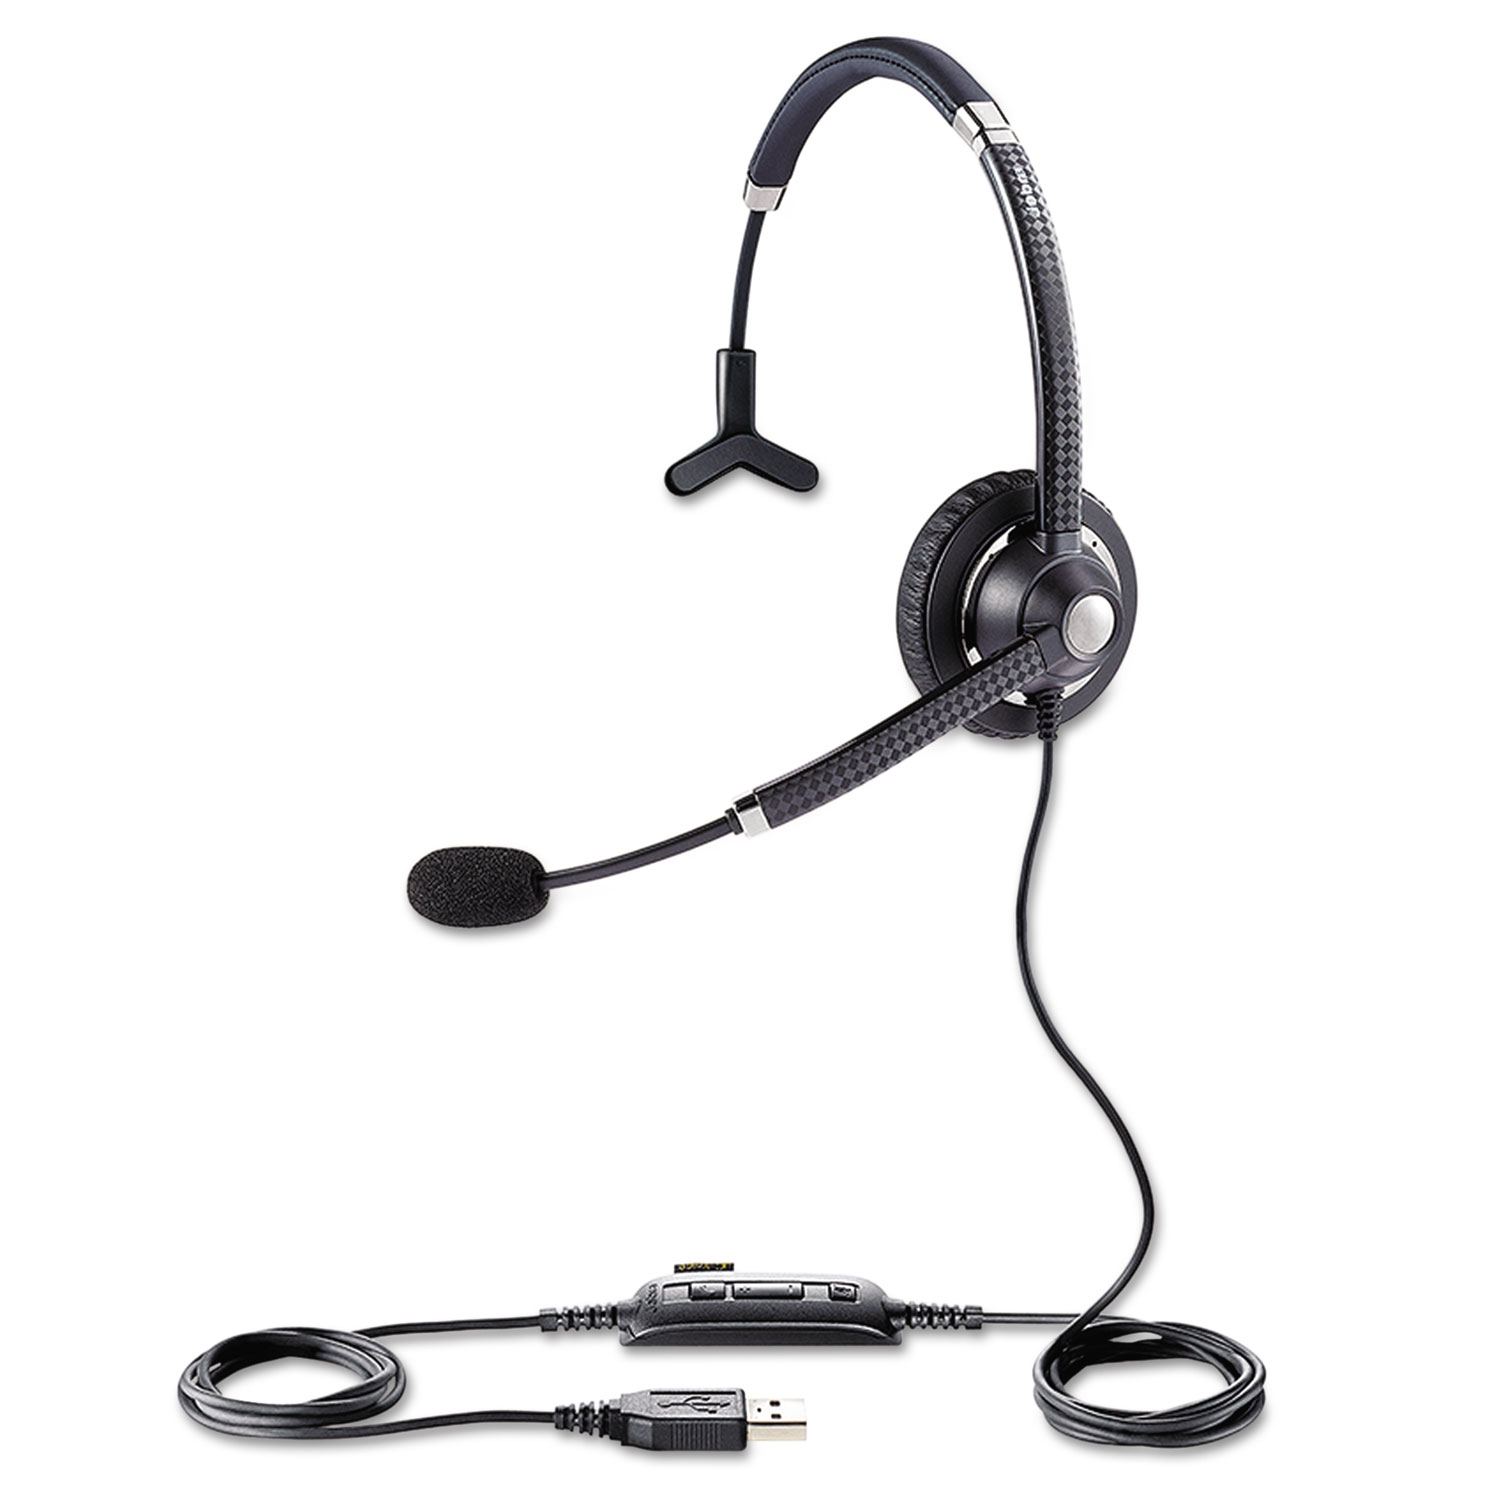 UC Voice 750 Monaural Over-the-Head Headset, Dark Color